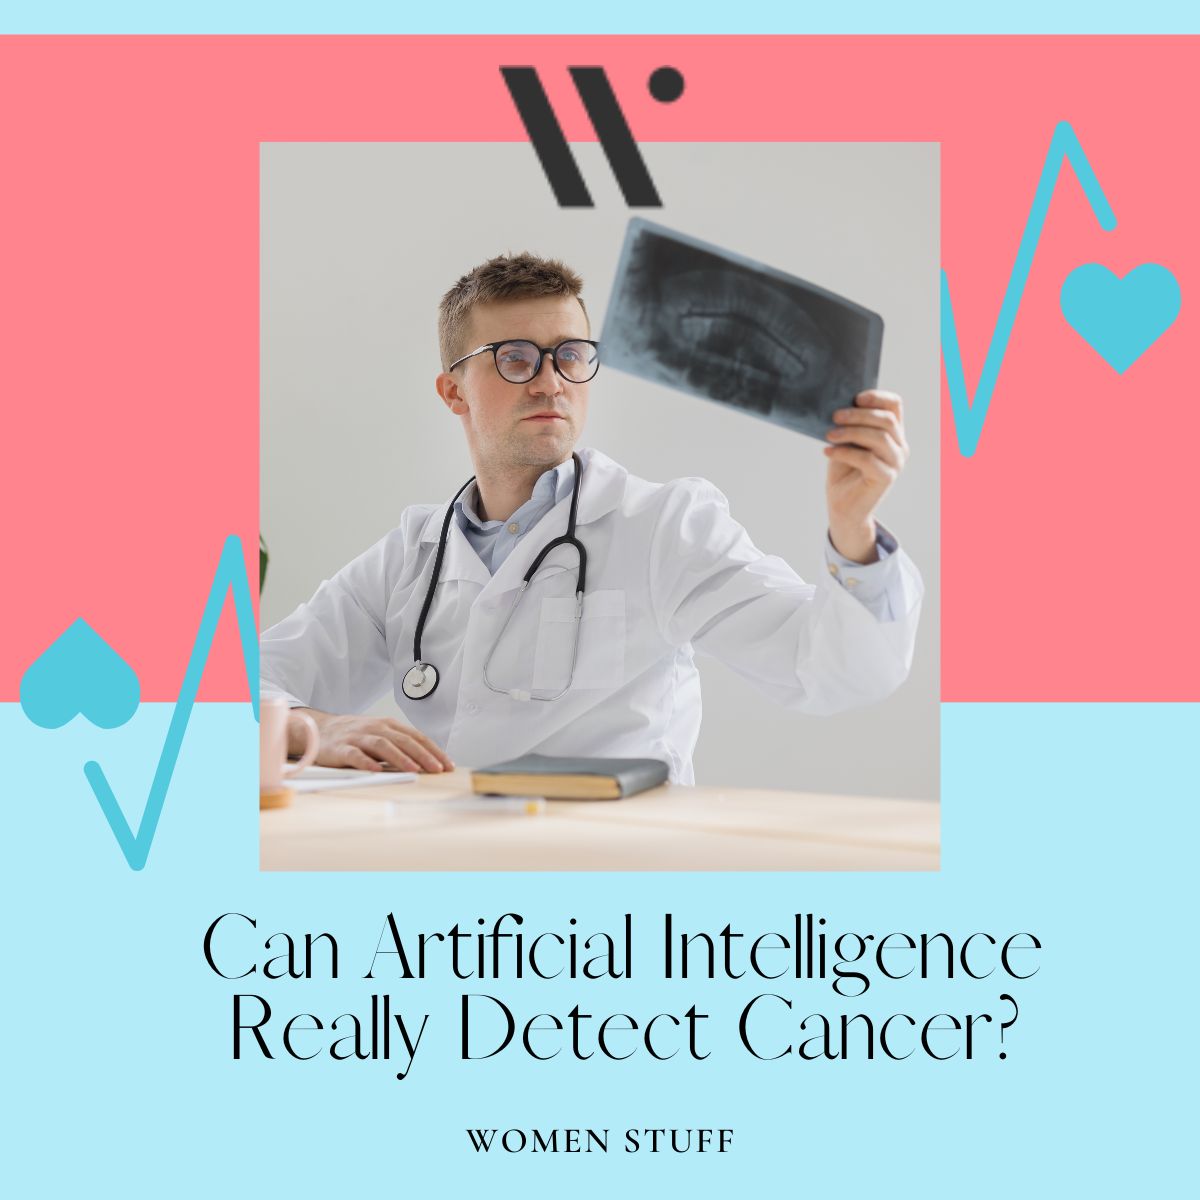 Can Artificial Intelligence Really Detect Cancer Banner Image - the Caucasian male doctor diagnoses the patient based on his tests and the x-ray